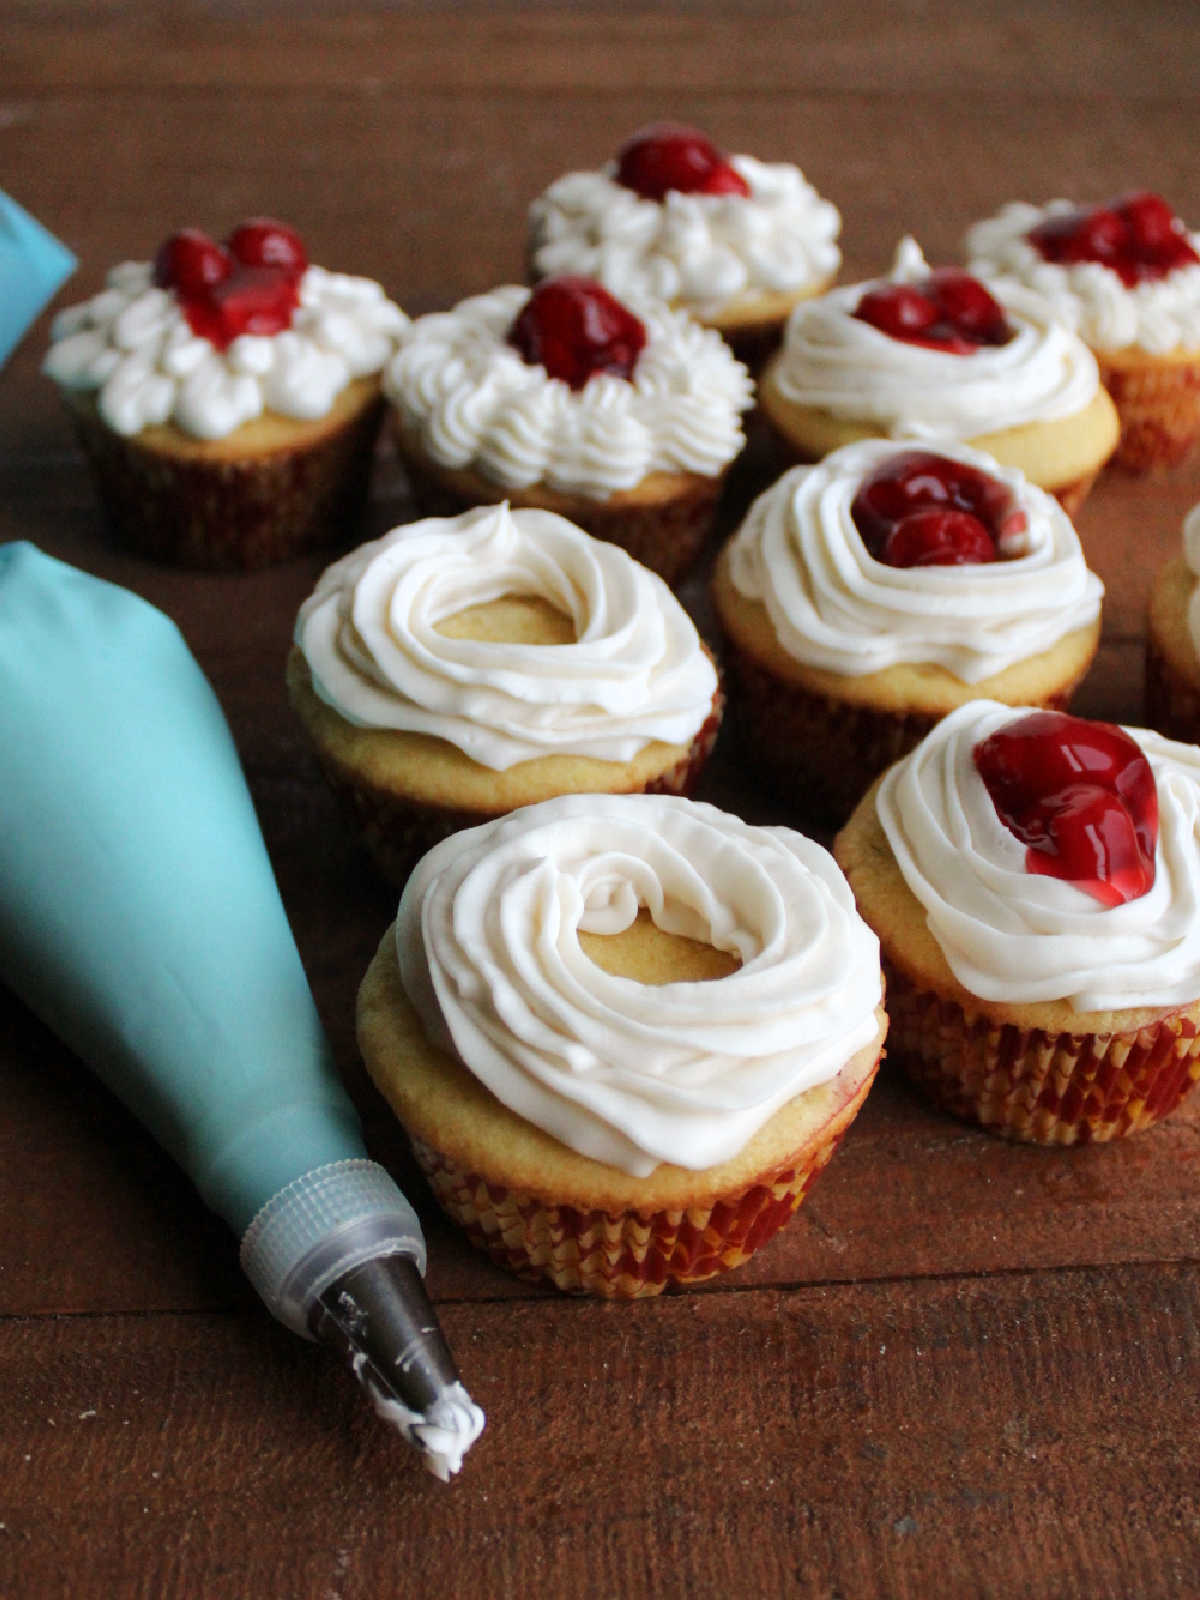 Piping bag with vanilla buttercream next to cupcakes with buttercream rings piped on top, some filled with cherry pie filling.